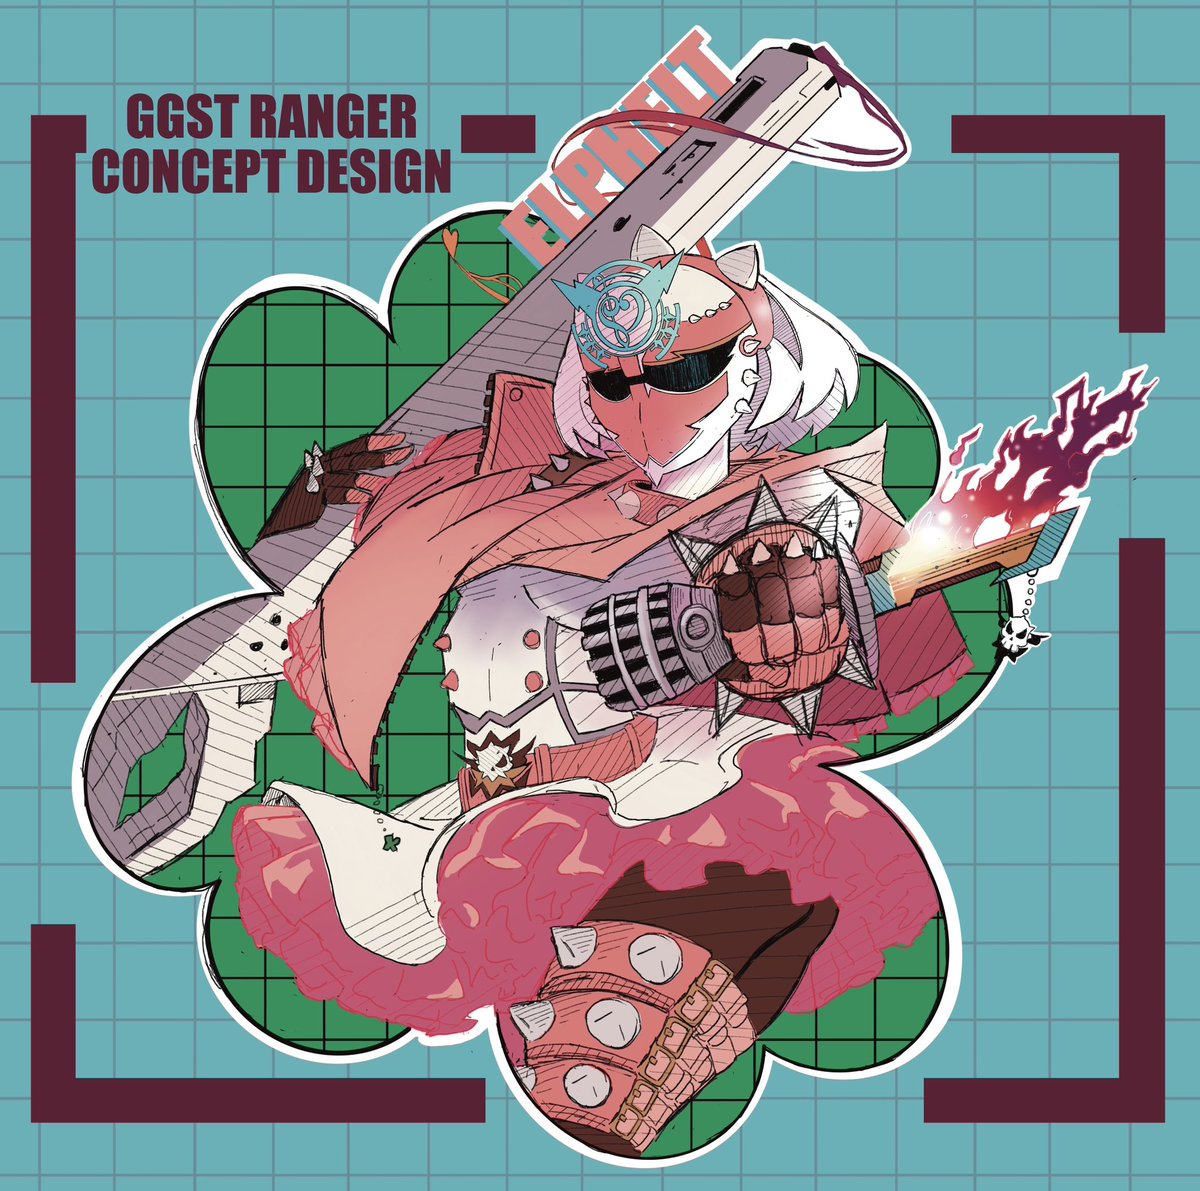 Elphelt X Power Rangers 🎤👊

I need your help coming up with Elphelt’s ranger name! I was thinking something in the vein of Heart Ranger or the like but I need suggestions.

Eventually this crossover will be a sticker!

#ggst #powerrangers #ggst_el #Elphelt #tokusatsu